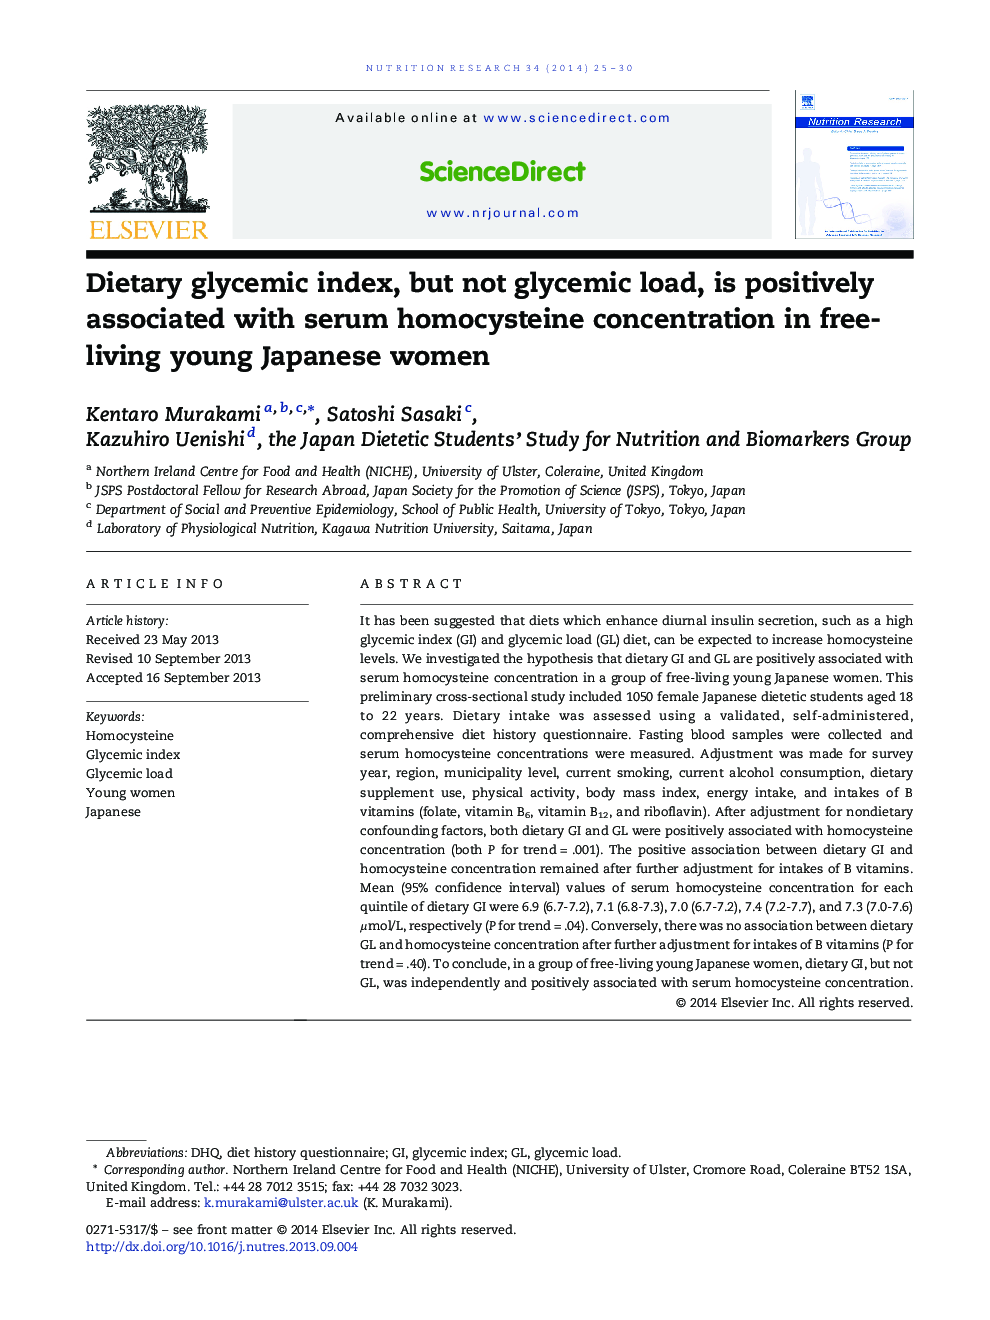 Dietary glycemic index, but not glycemic load, is positively associated with serum homocysteine concentration in free-living young Japanese women